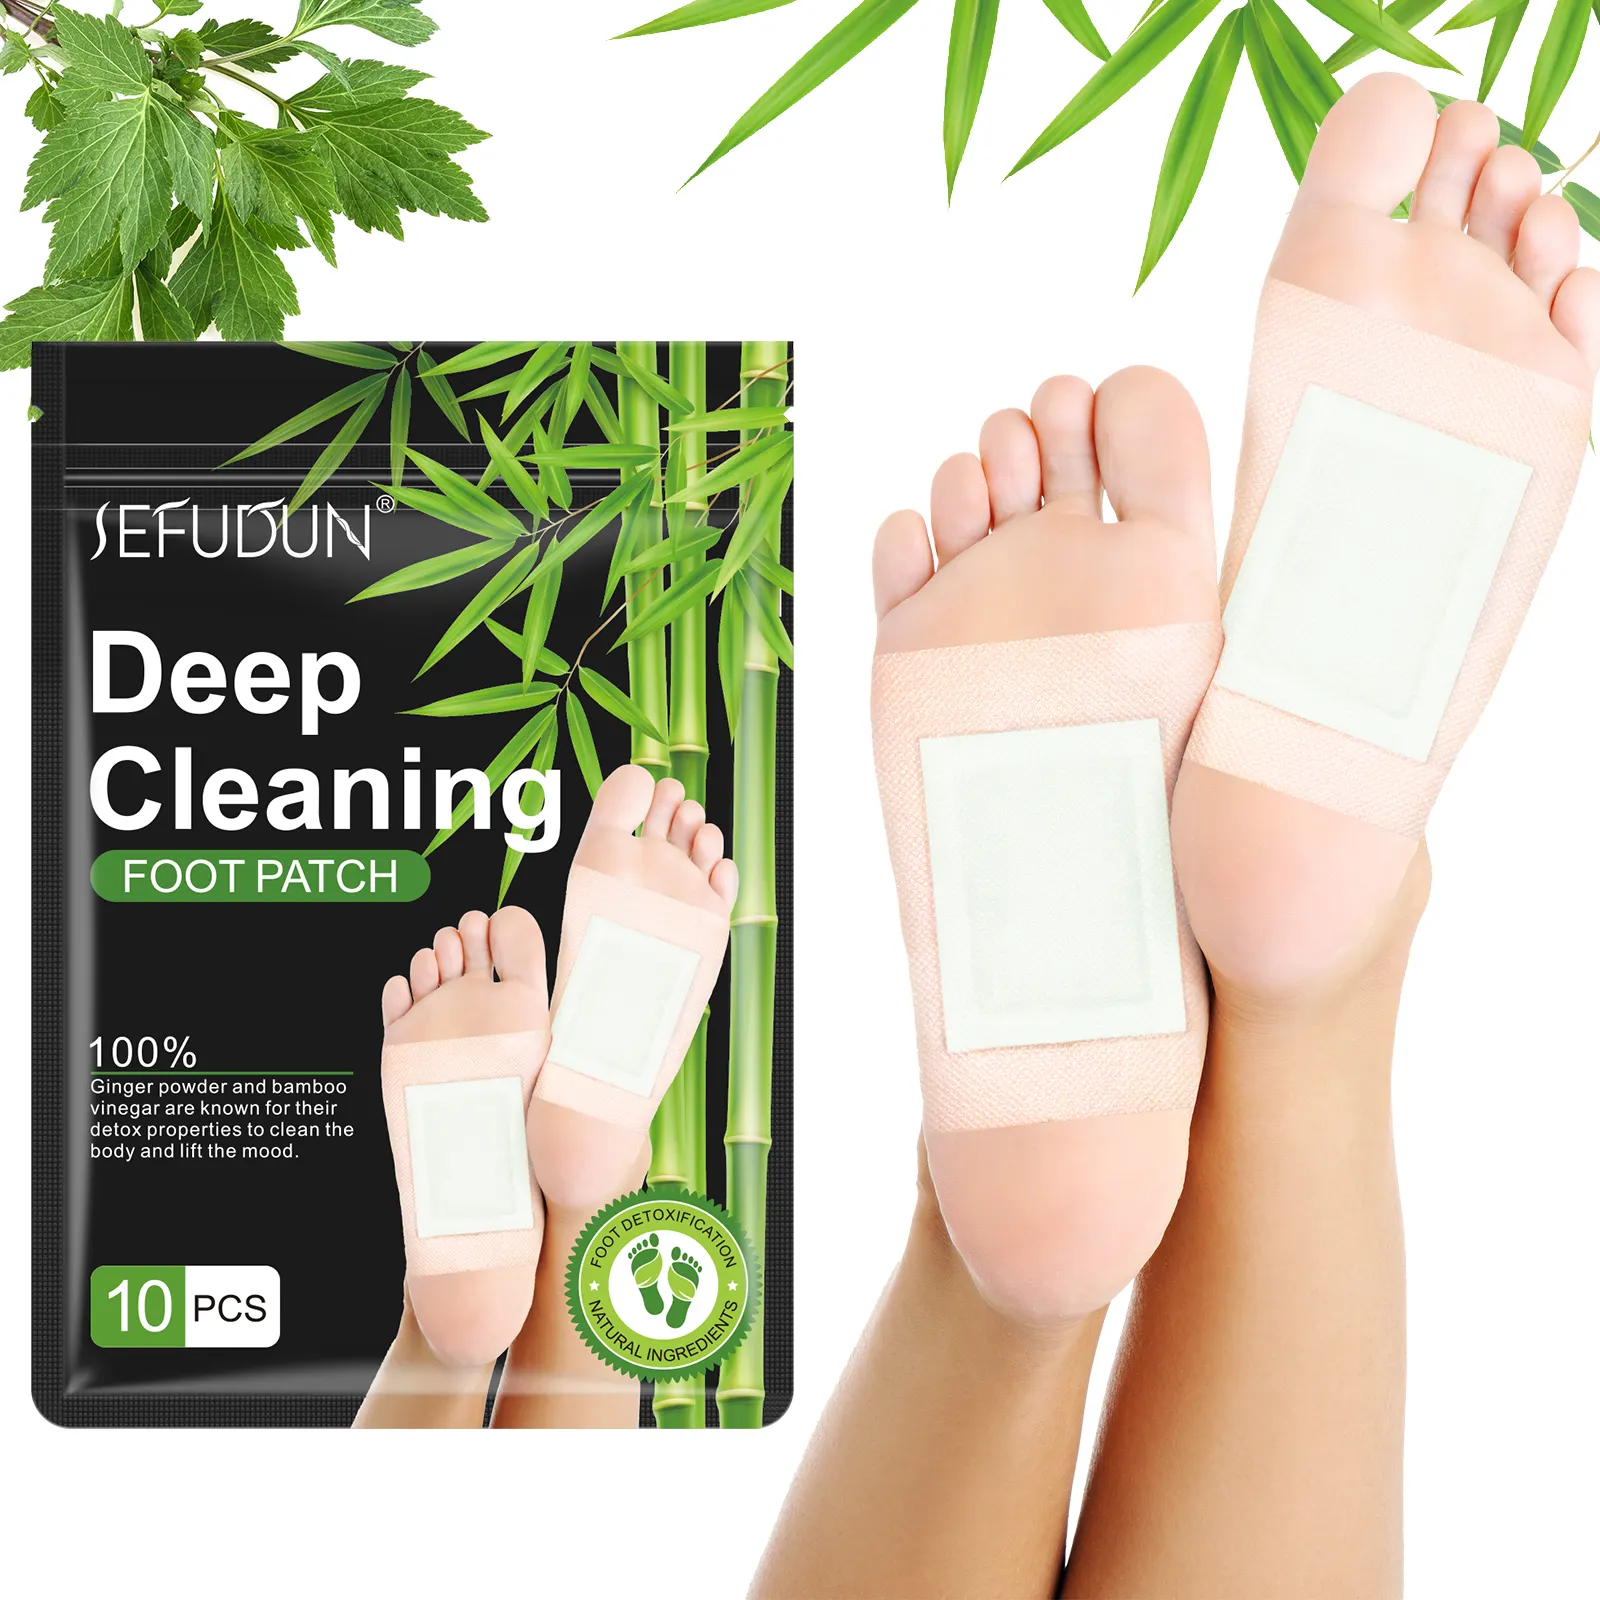 SEFUDUN OEM customizable relax body relieve fatigue foot patch natural herbal element,deep cleansing detox foot patch